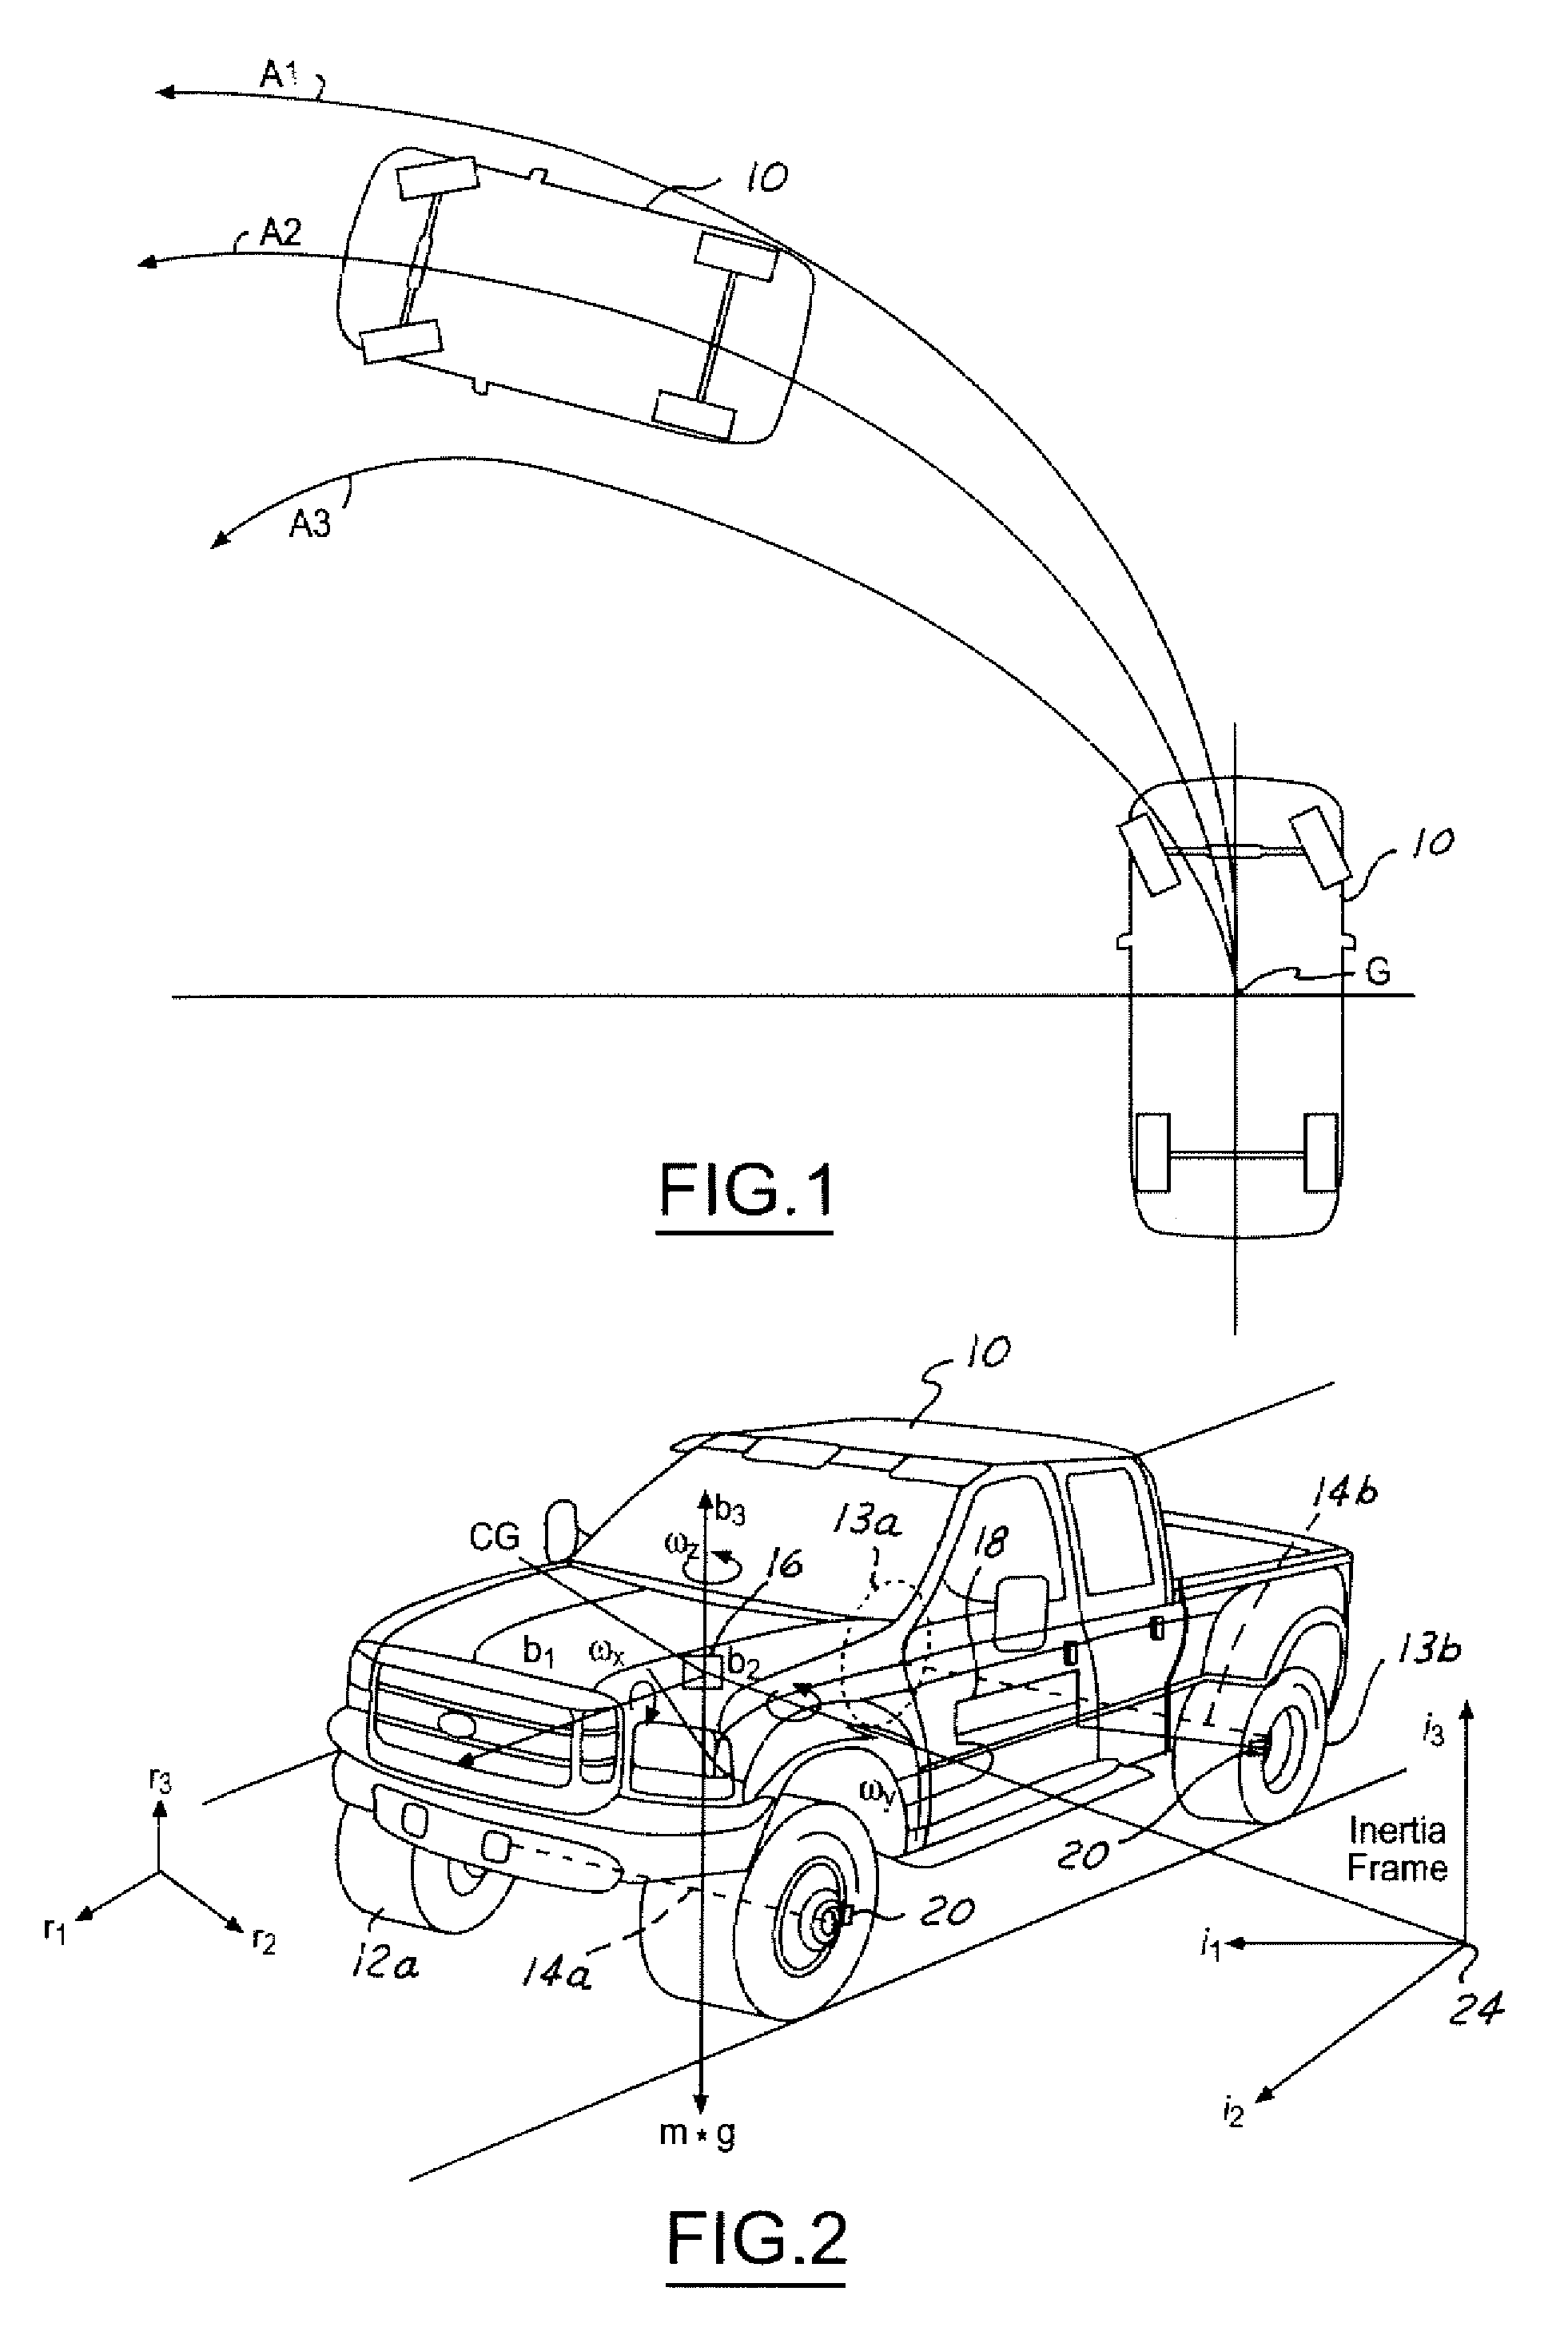 Method of controlling an automotive vehicle having a trailer